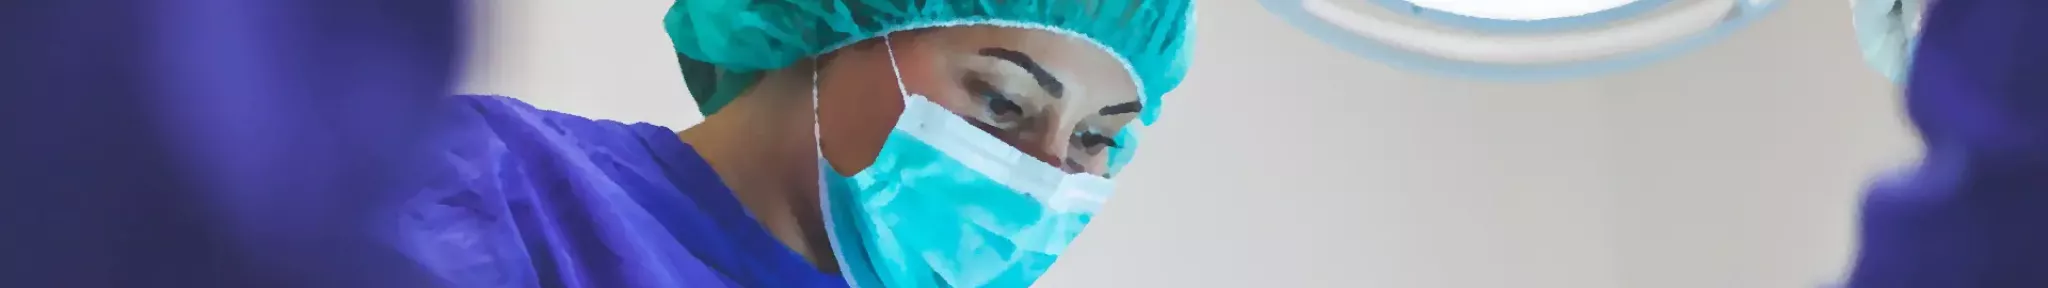 A surgeon is observing a patient out of view